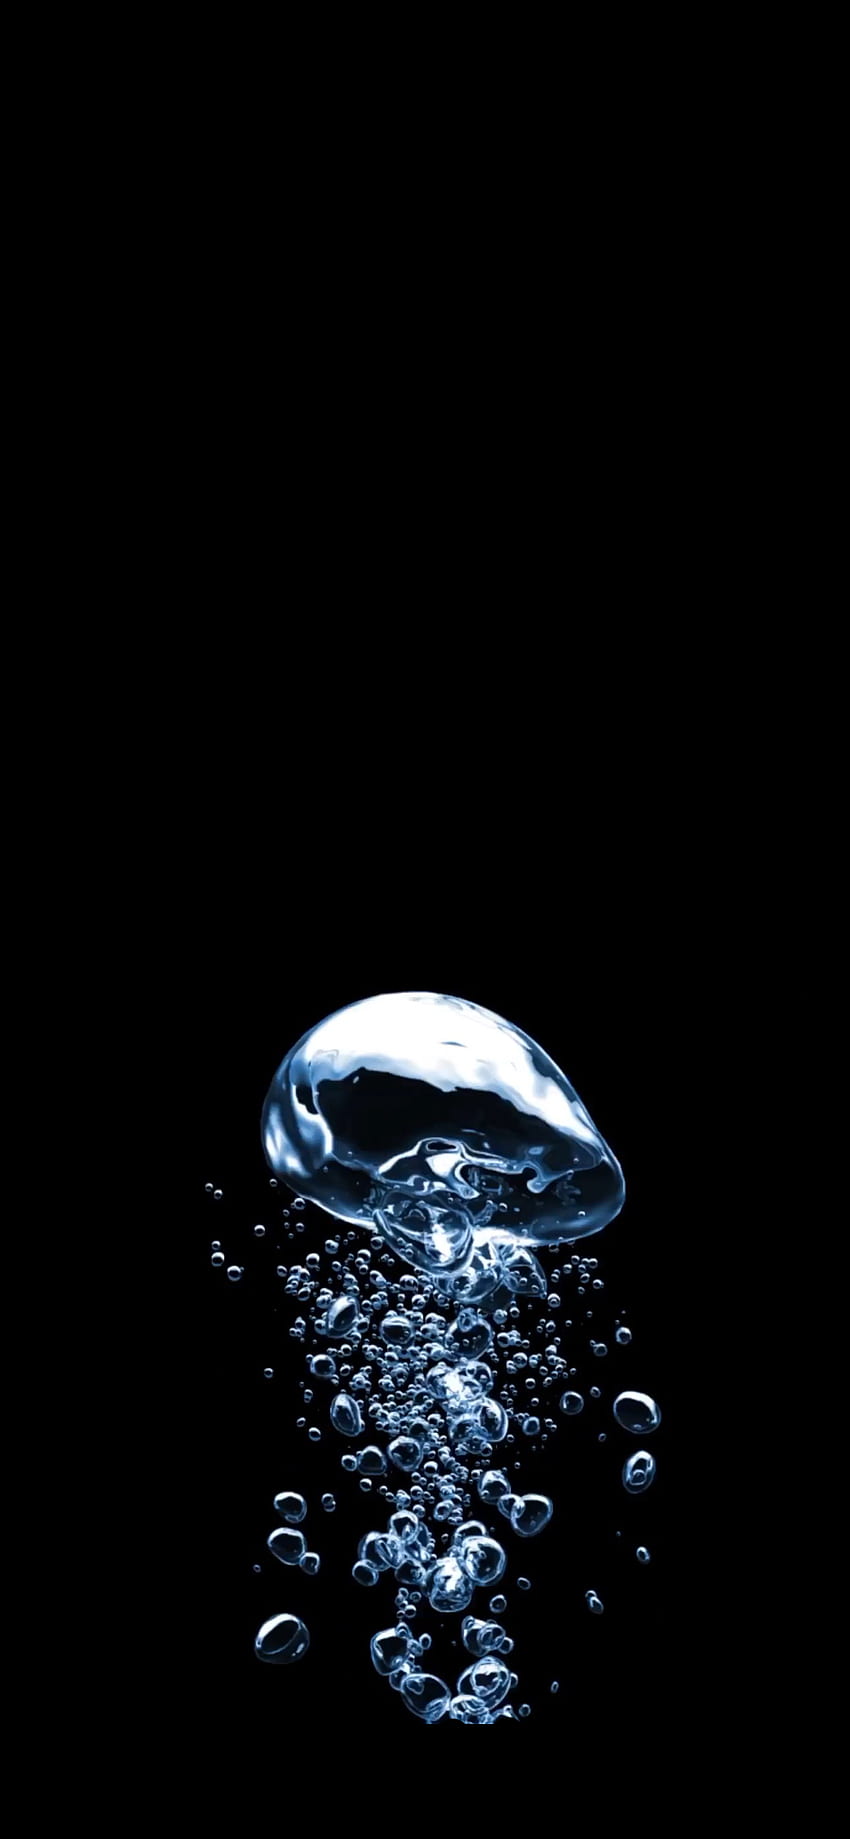 250+ iPhone Wallpapers & Live Wallpapers - 4K, 3D, ultra HD